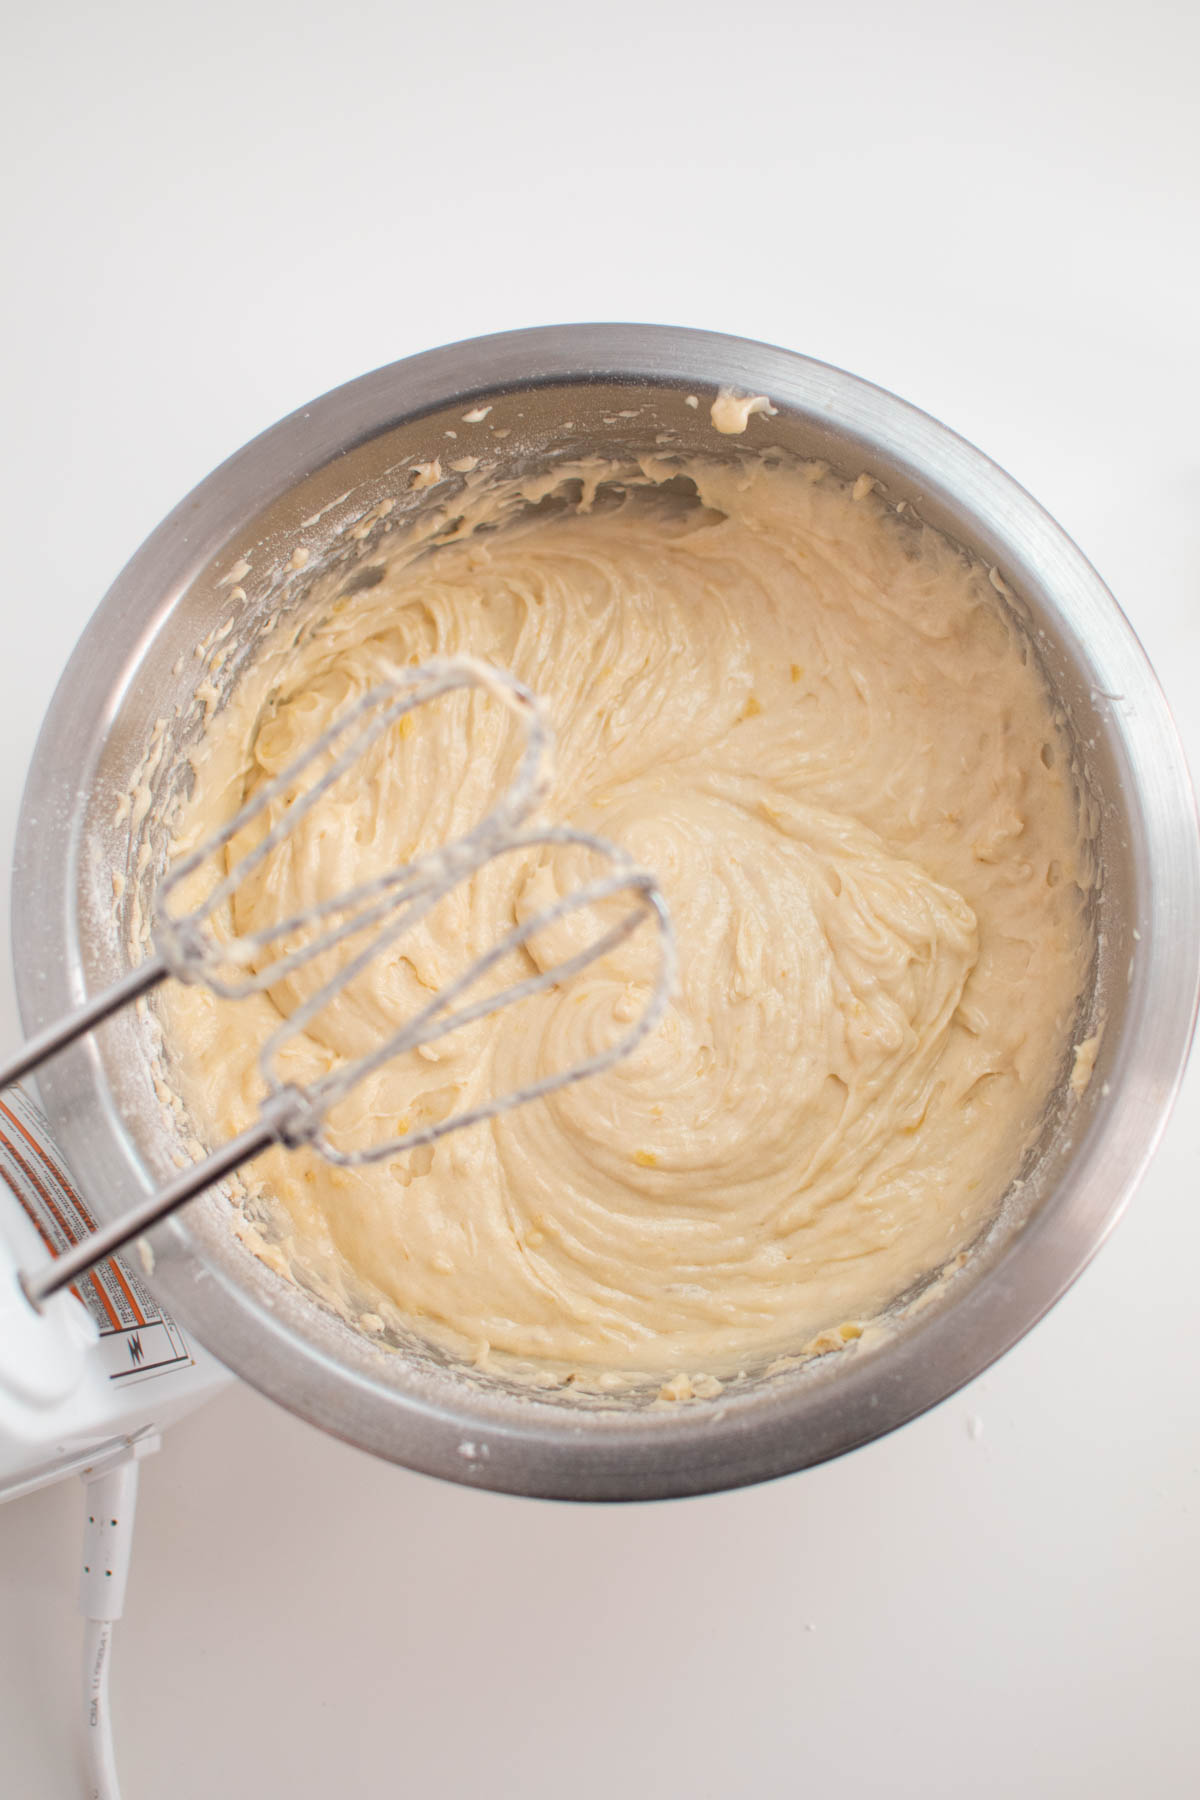 Mixed banana bar batter in metal mixing bowl with beaters above.